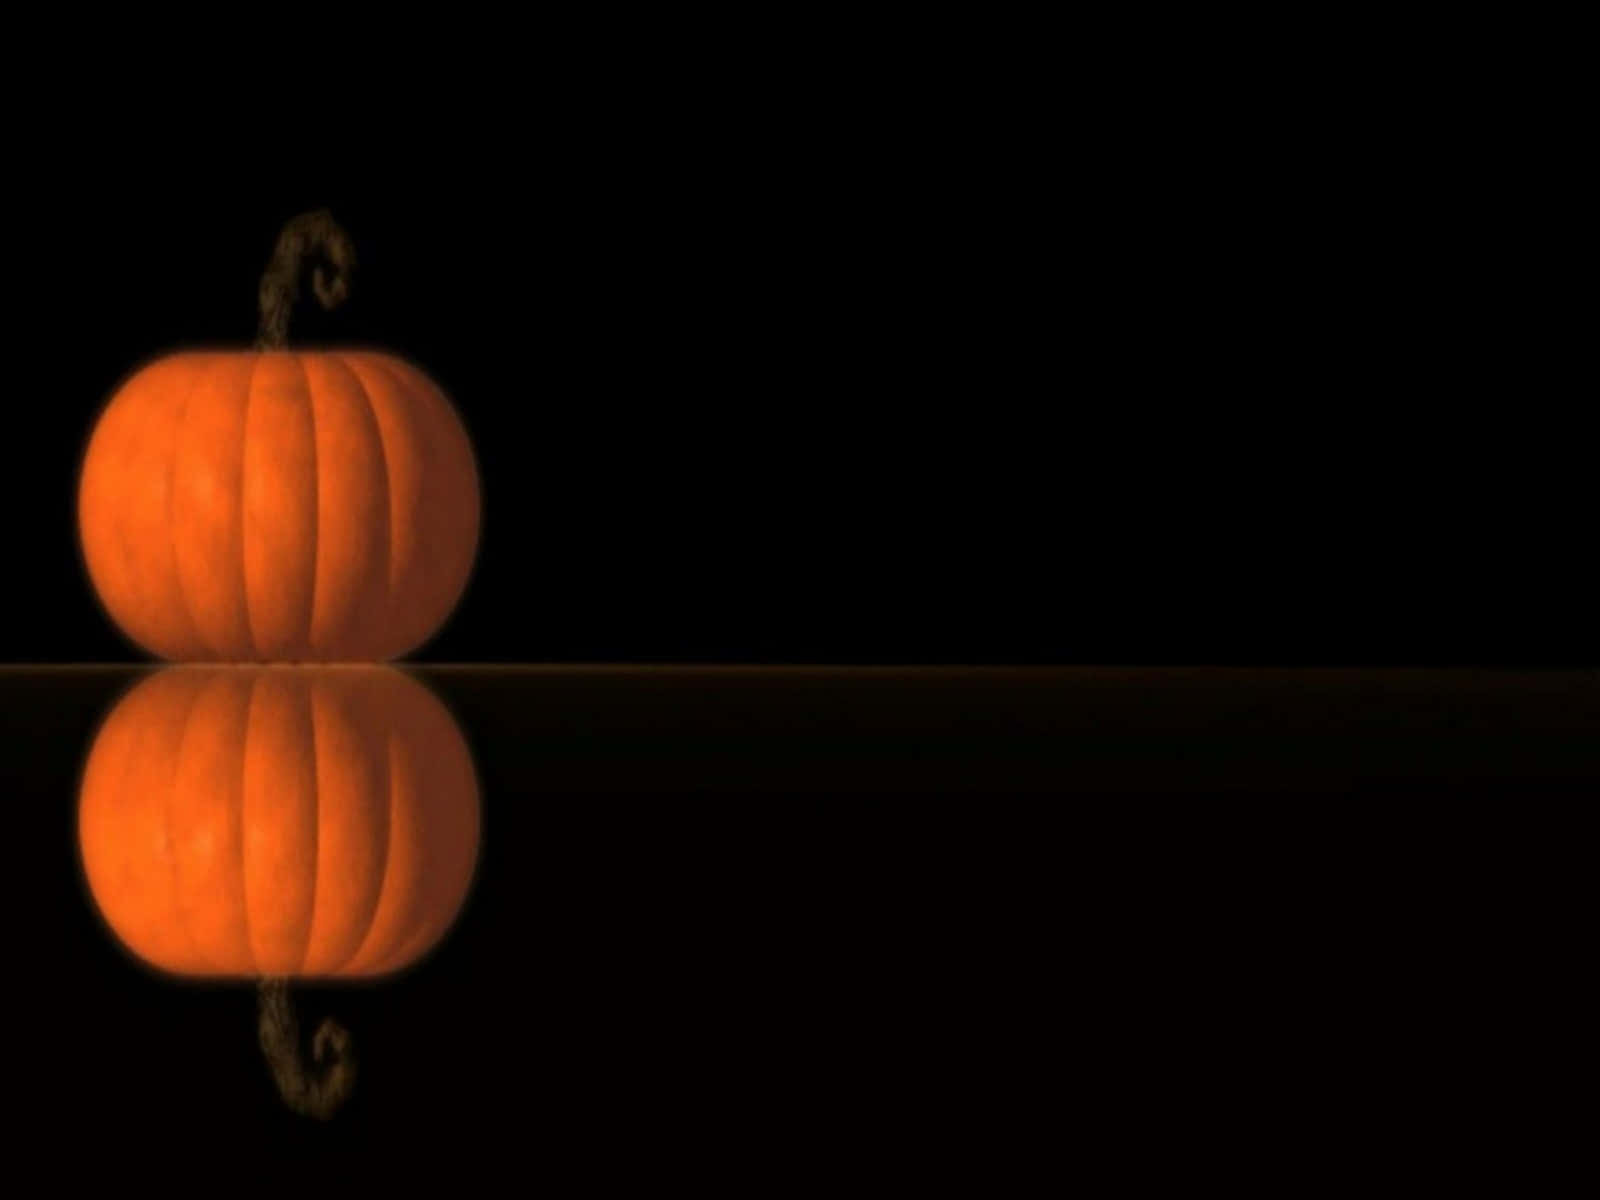 Carved Pumpkin with Spooky Eyes Wallpaper